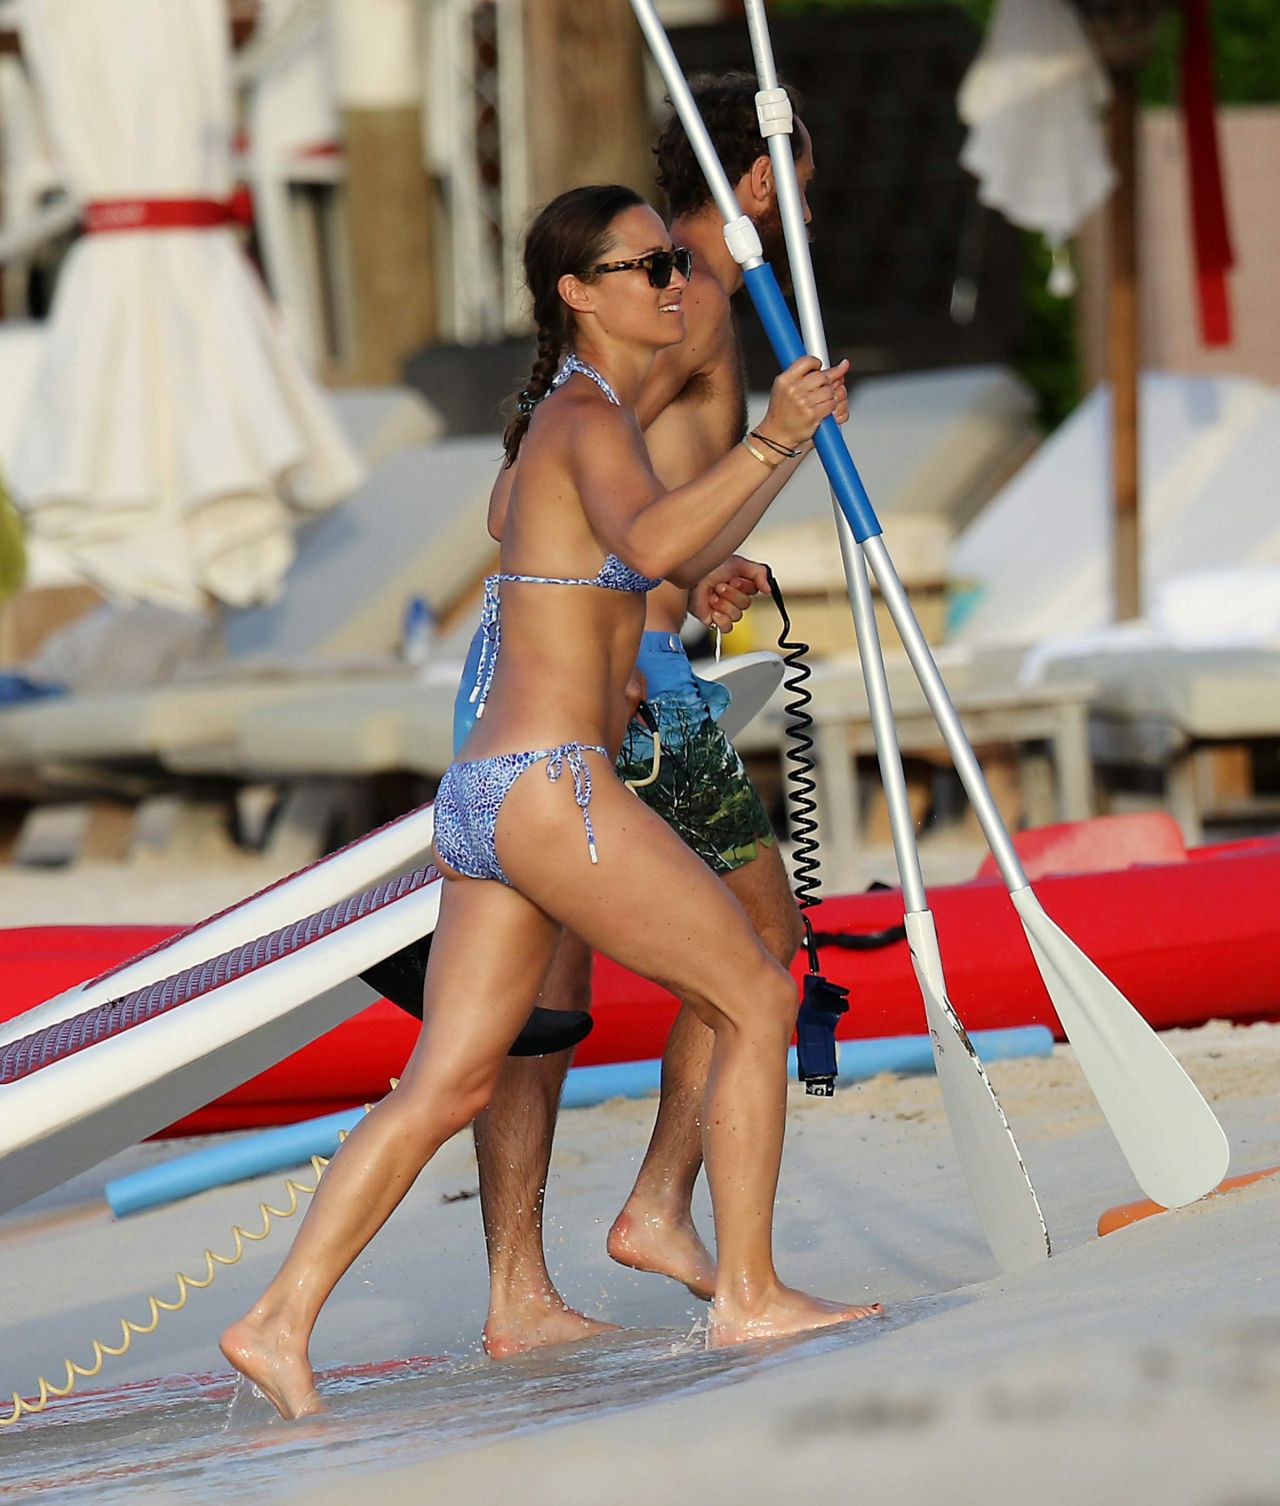 pippa-middleton-paddle-boarding-in-st-barths-august-2015_15.